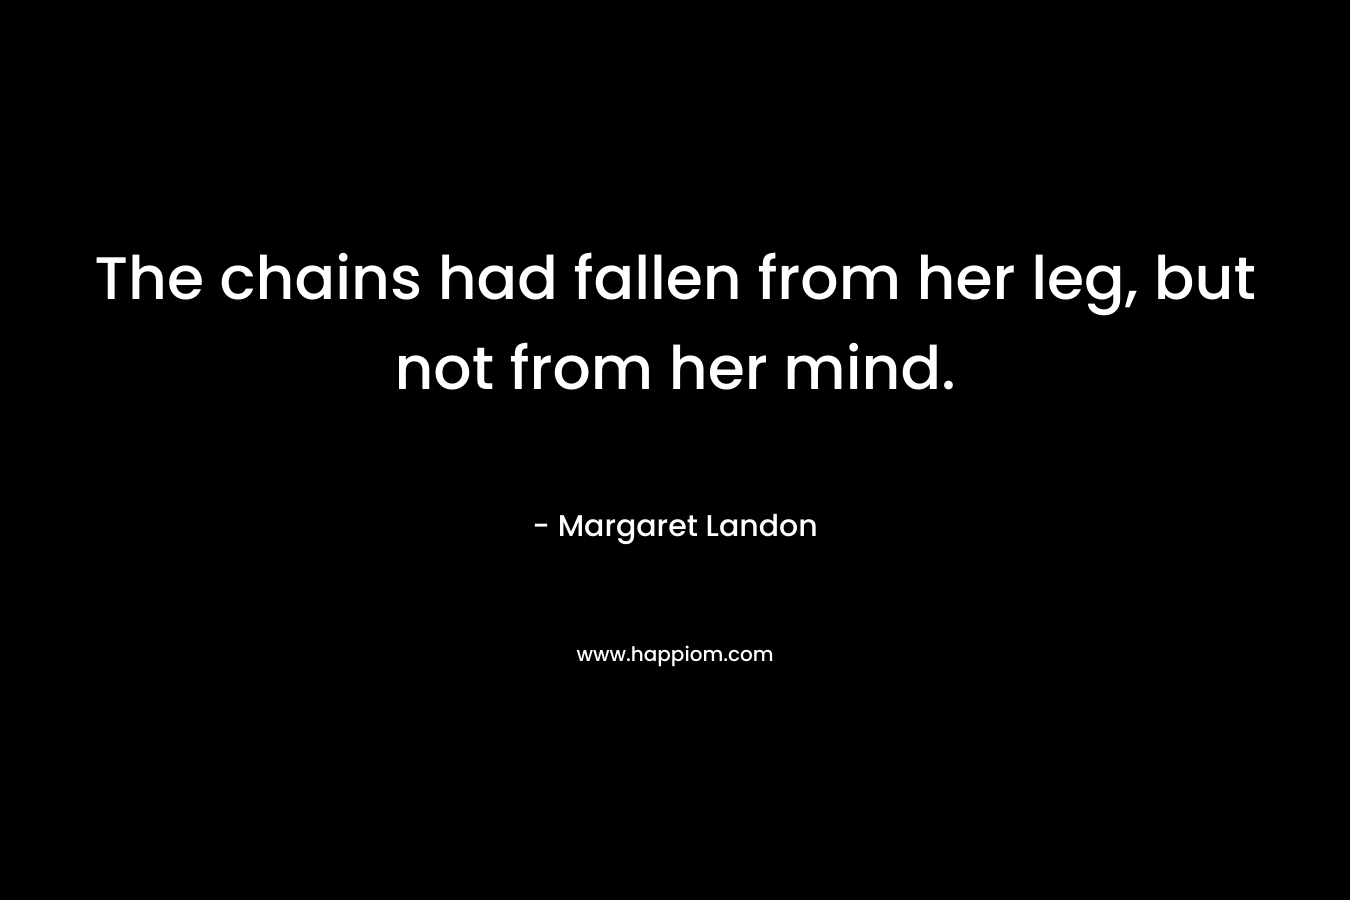 The chains had fallen from her leg, but not from her mind. – Margaret Landon